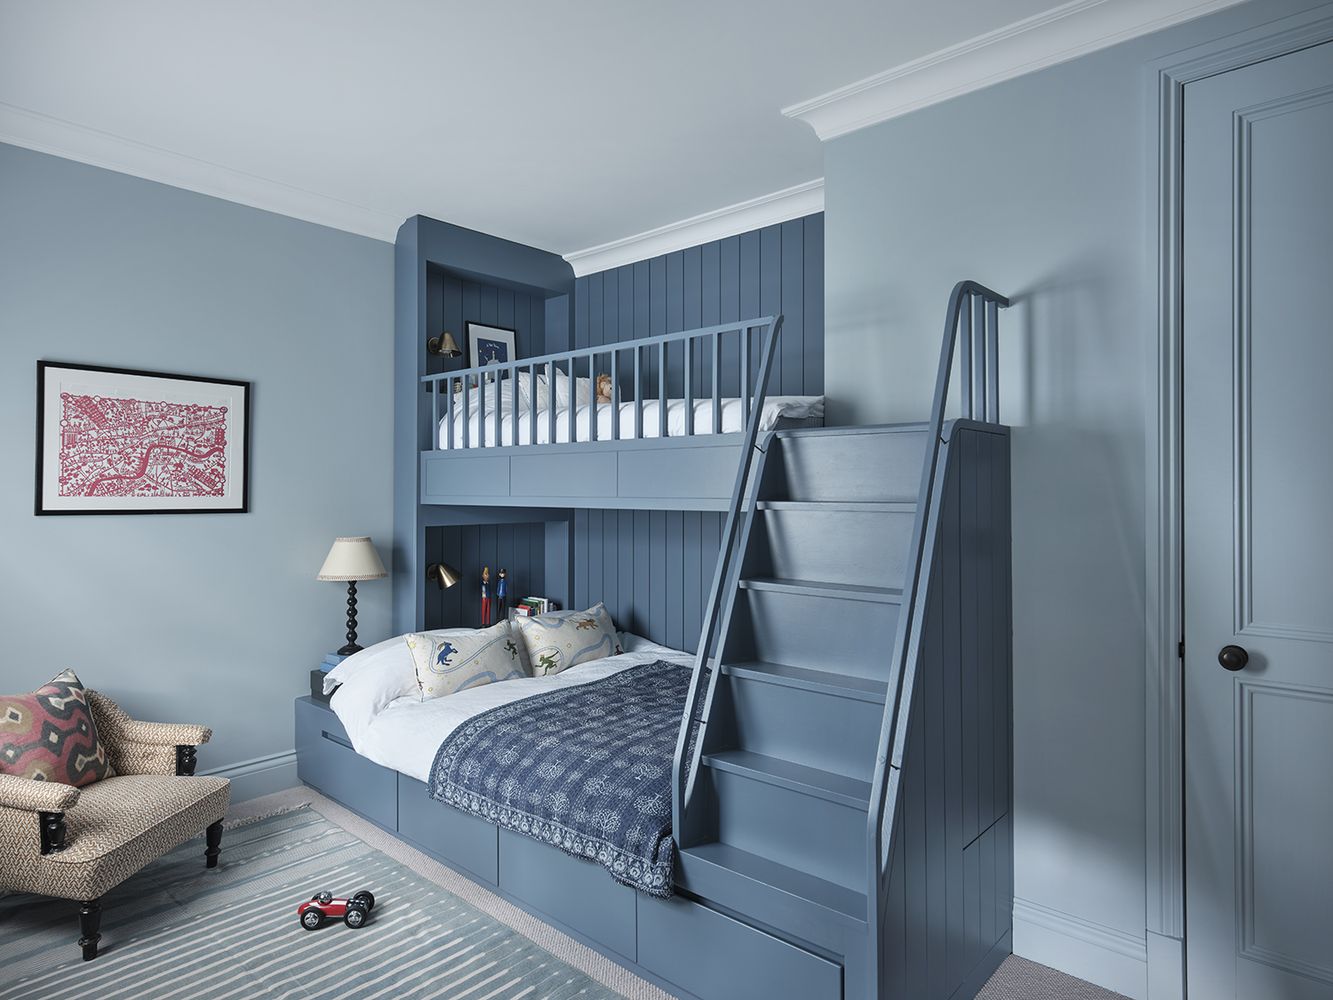 Boys bedroom ideas Blue bunk bed with full sized bed deroseesa